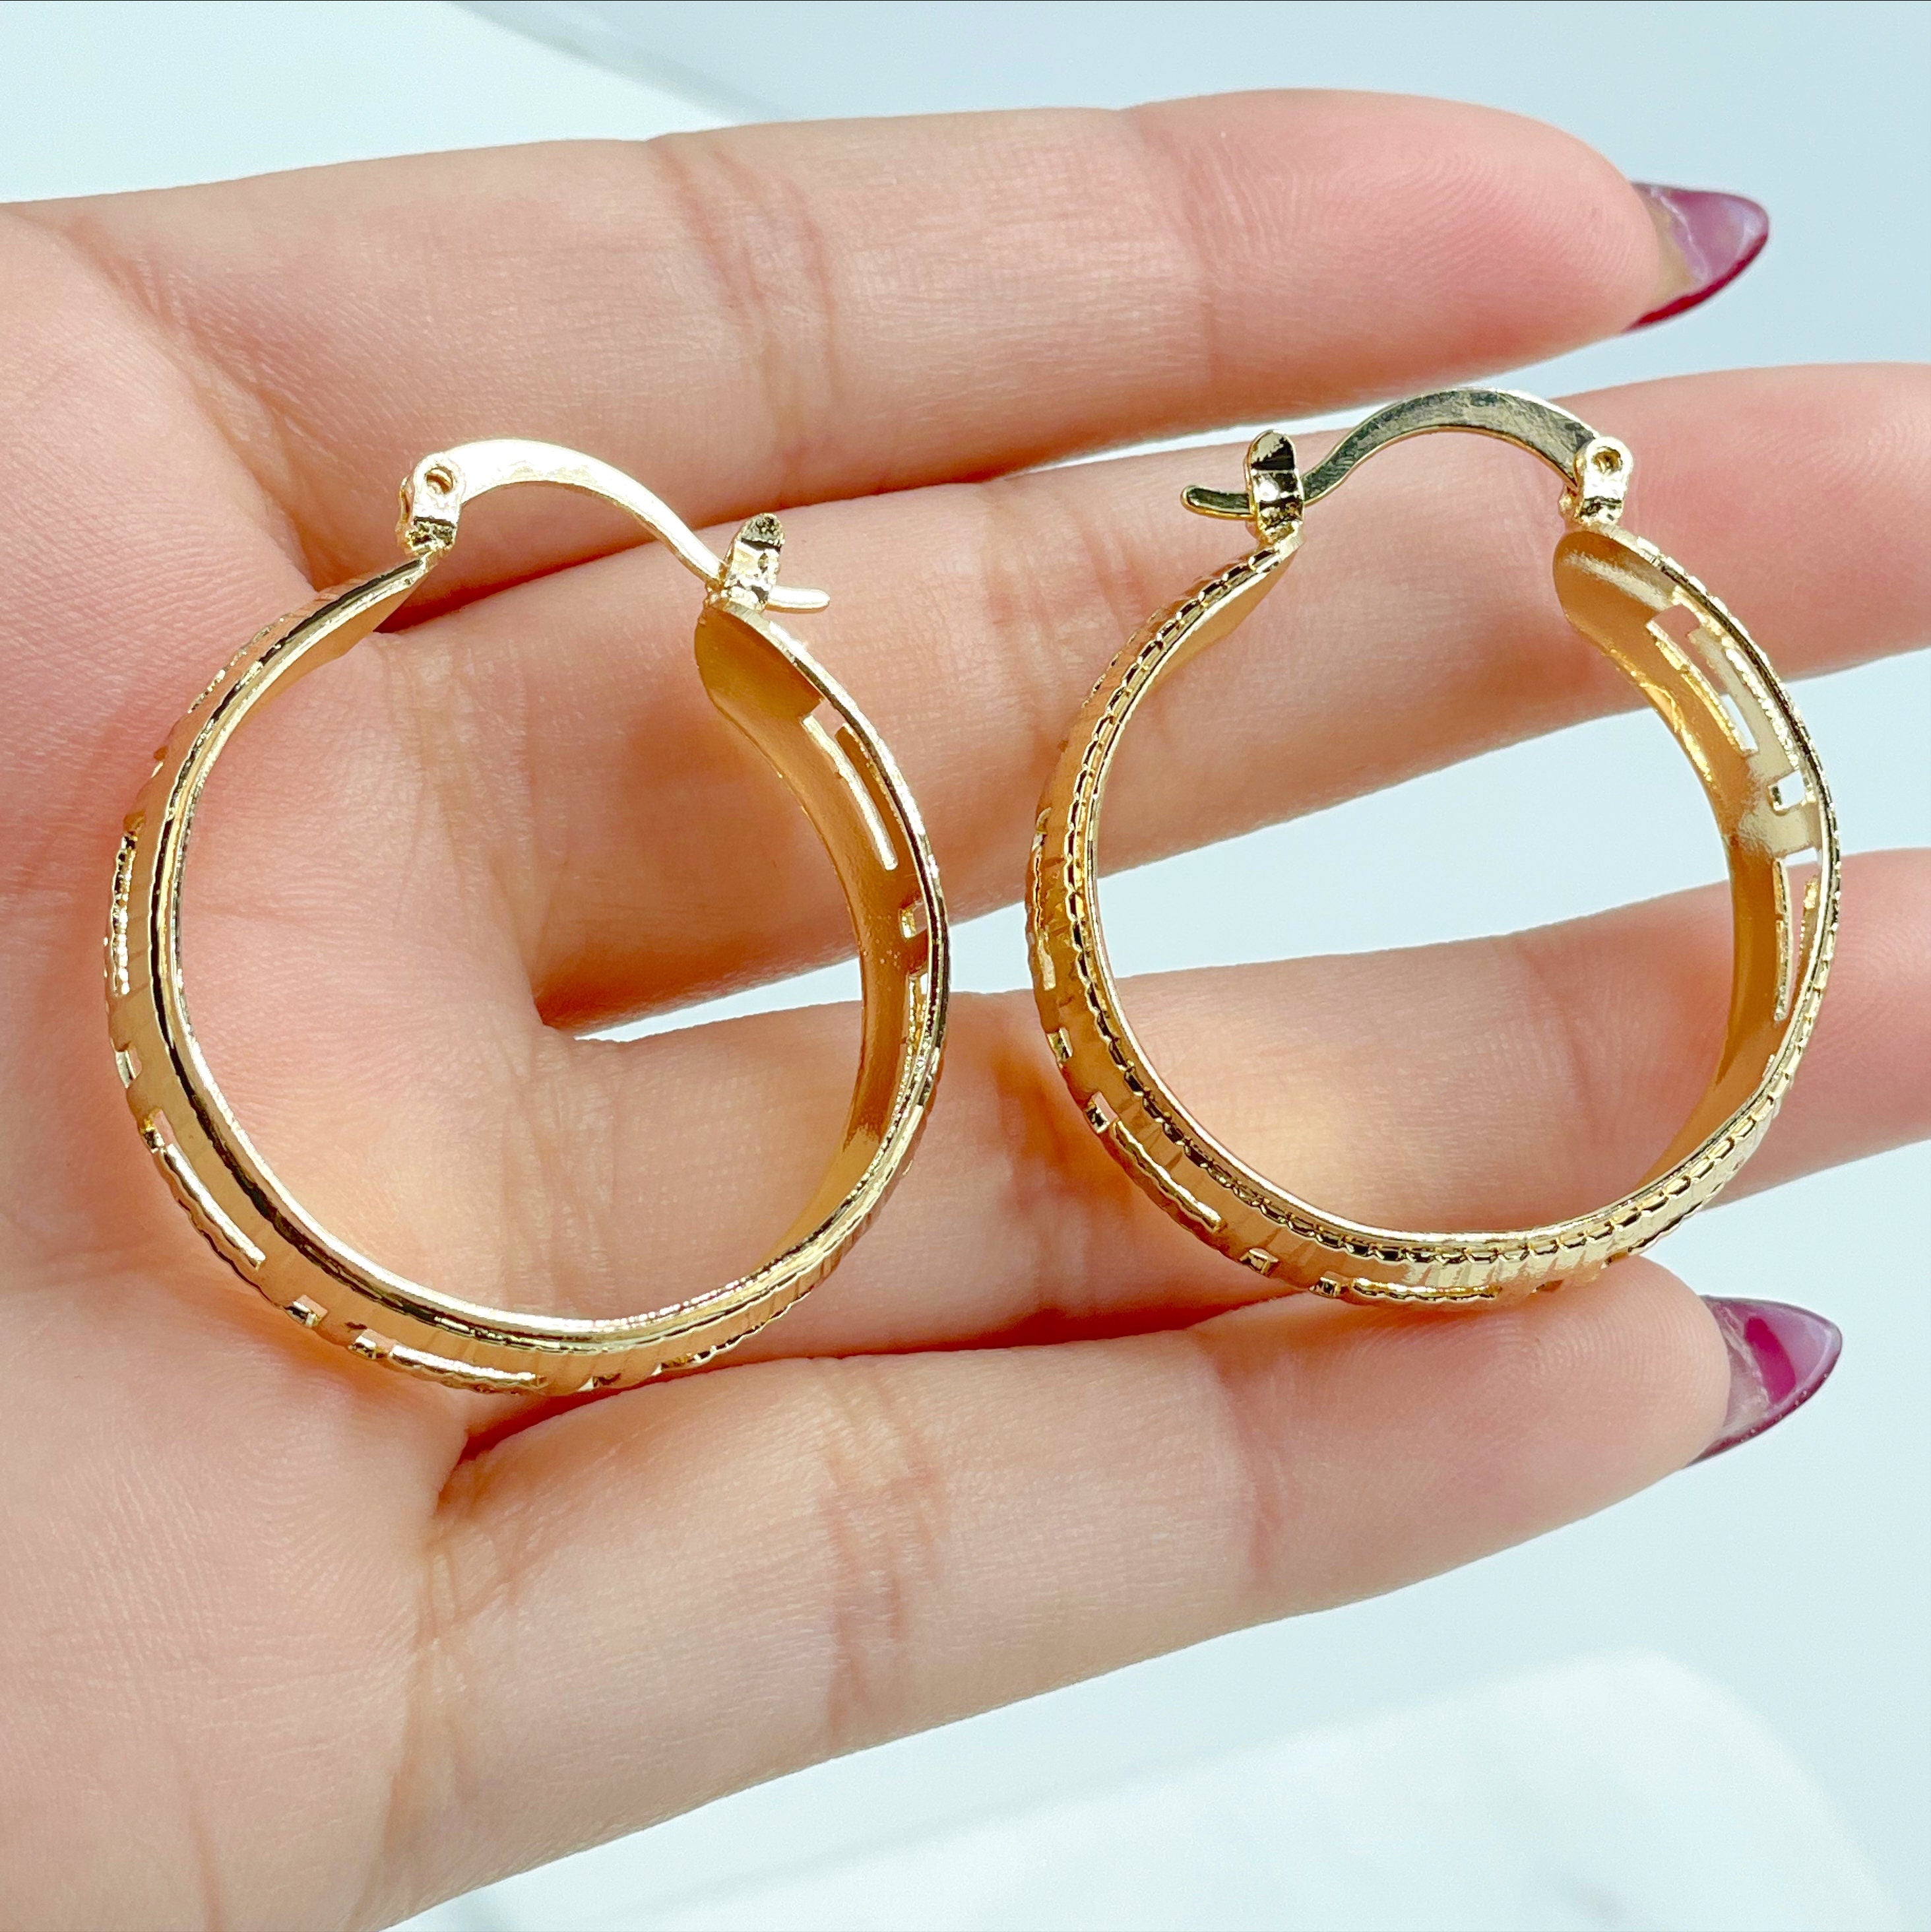 18K Gold Filled 30mm Z Modern Design Hoops Earrings, Wholesale and Jewelry Supplies